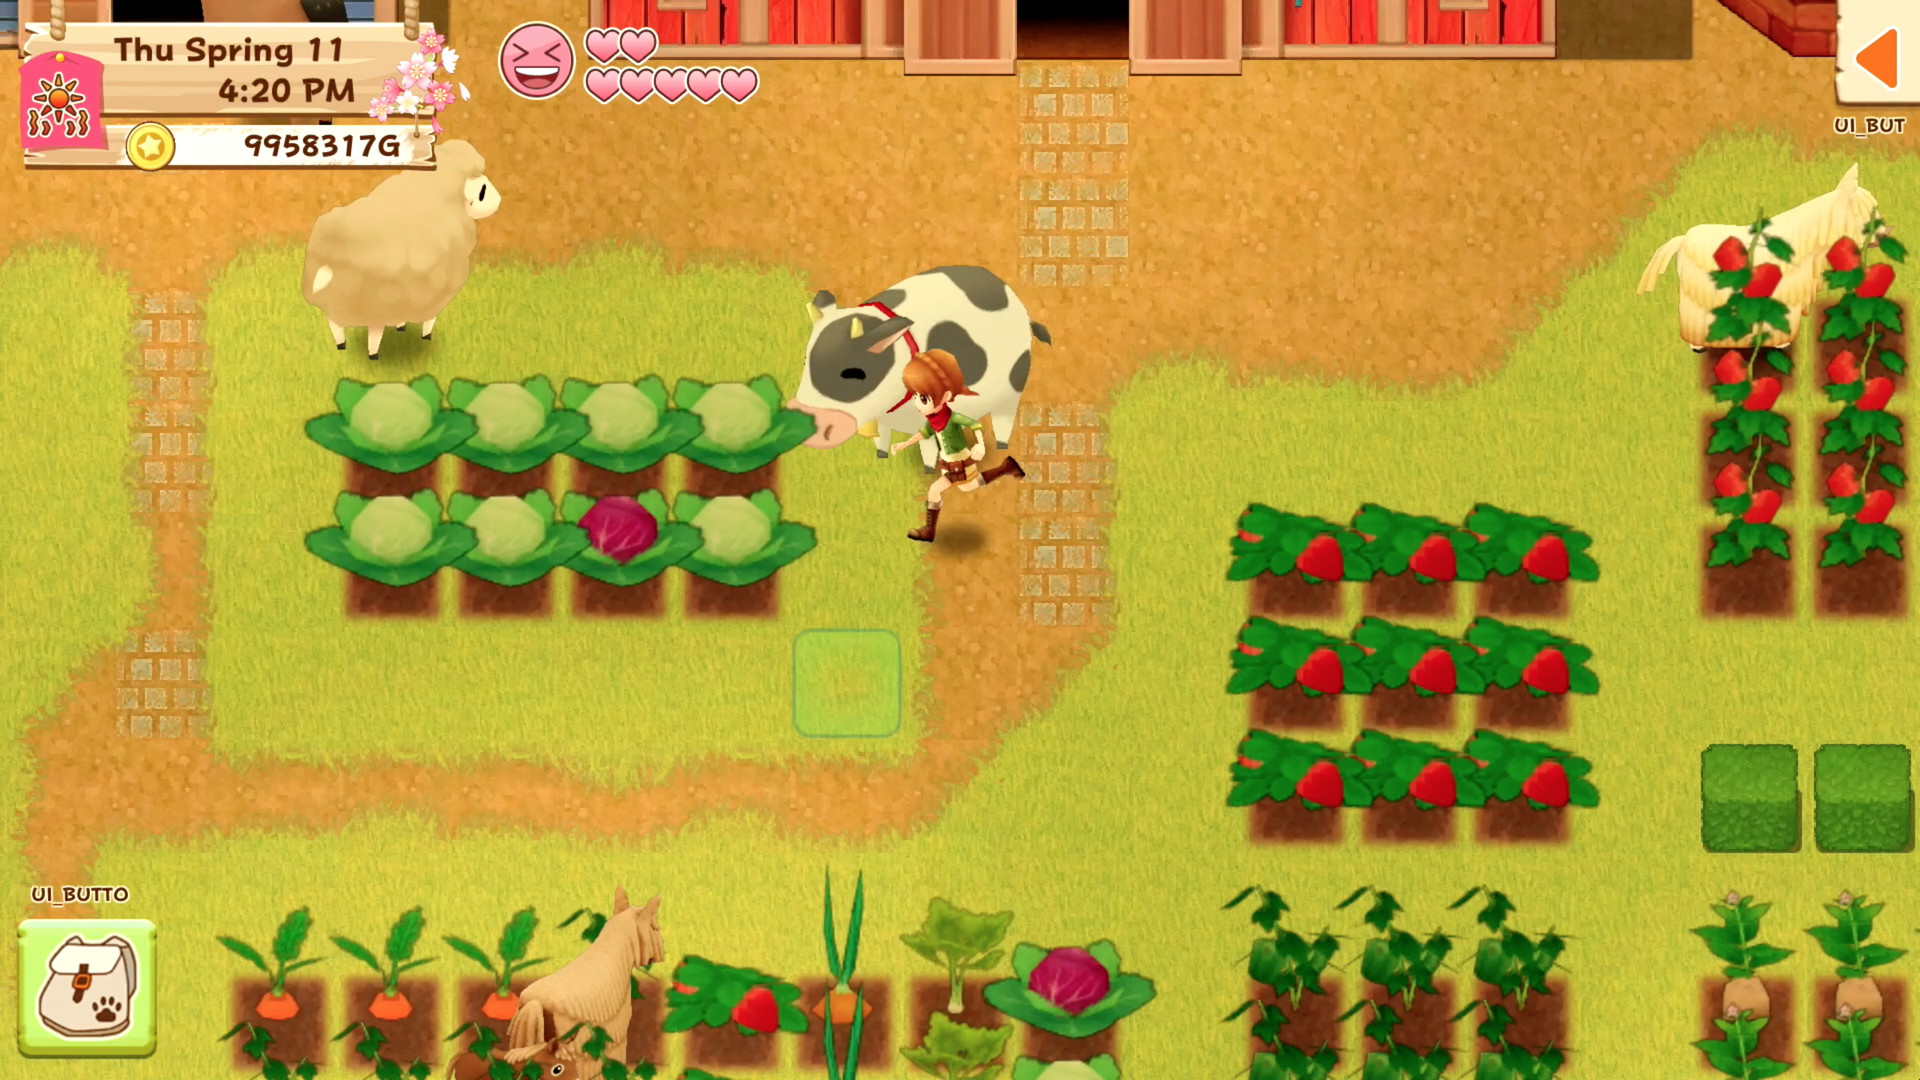 Harvest Moon: Light of Hope Complete Your Set RoW Steam CD Key 15.24$